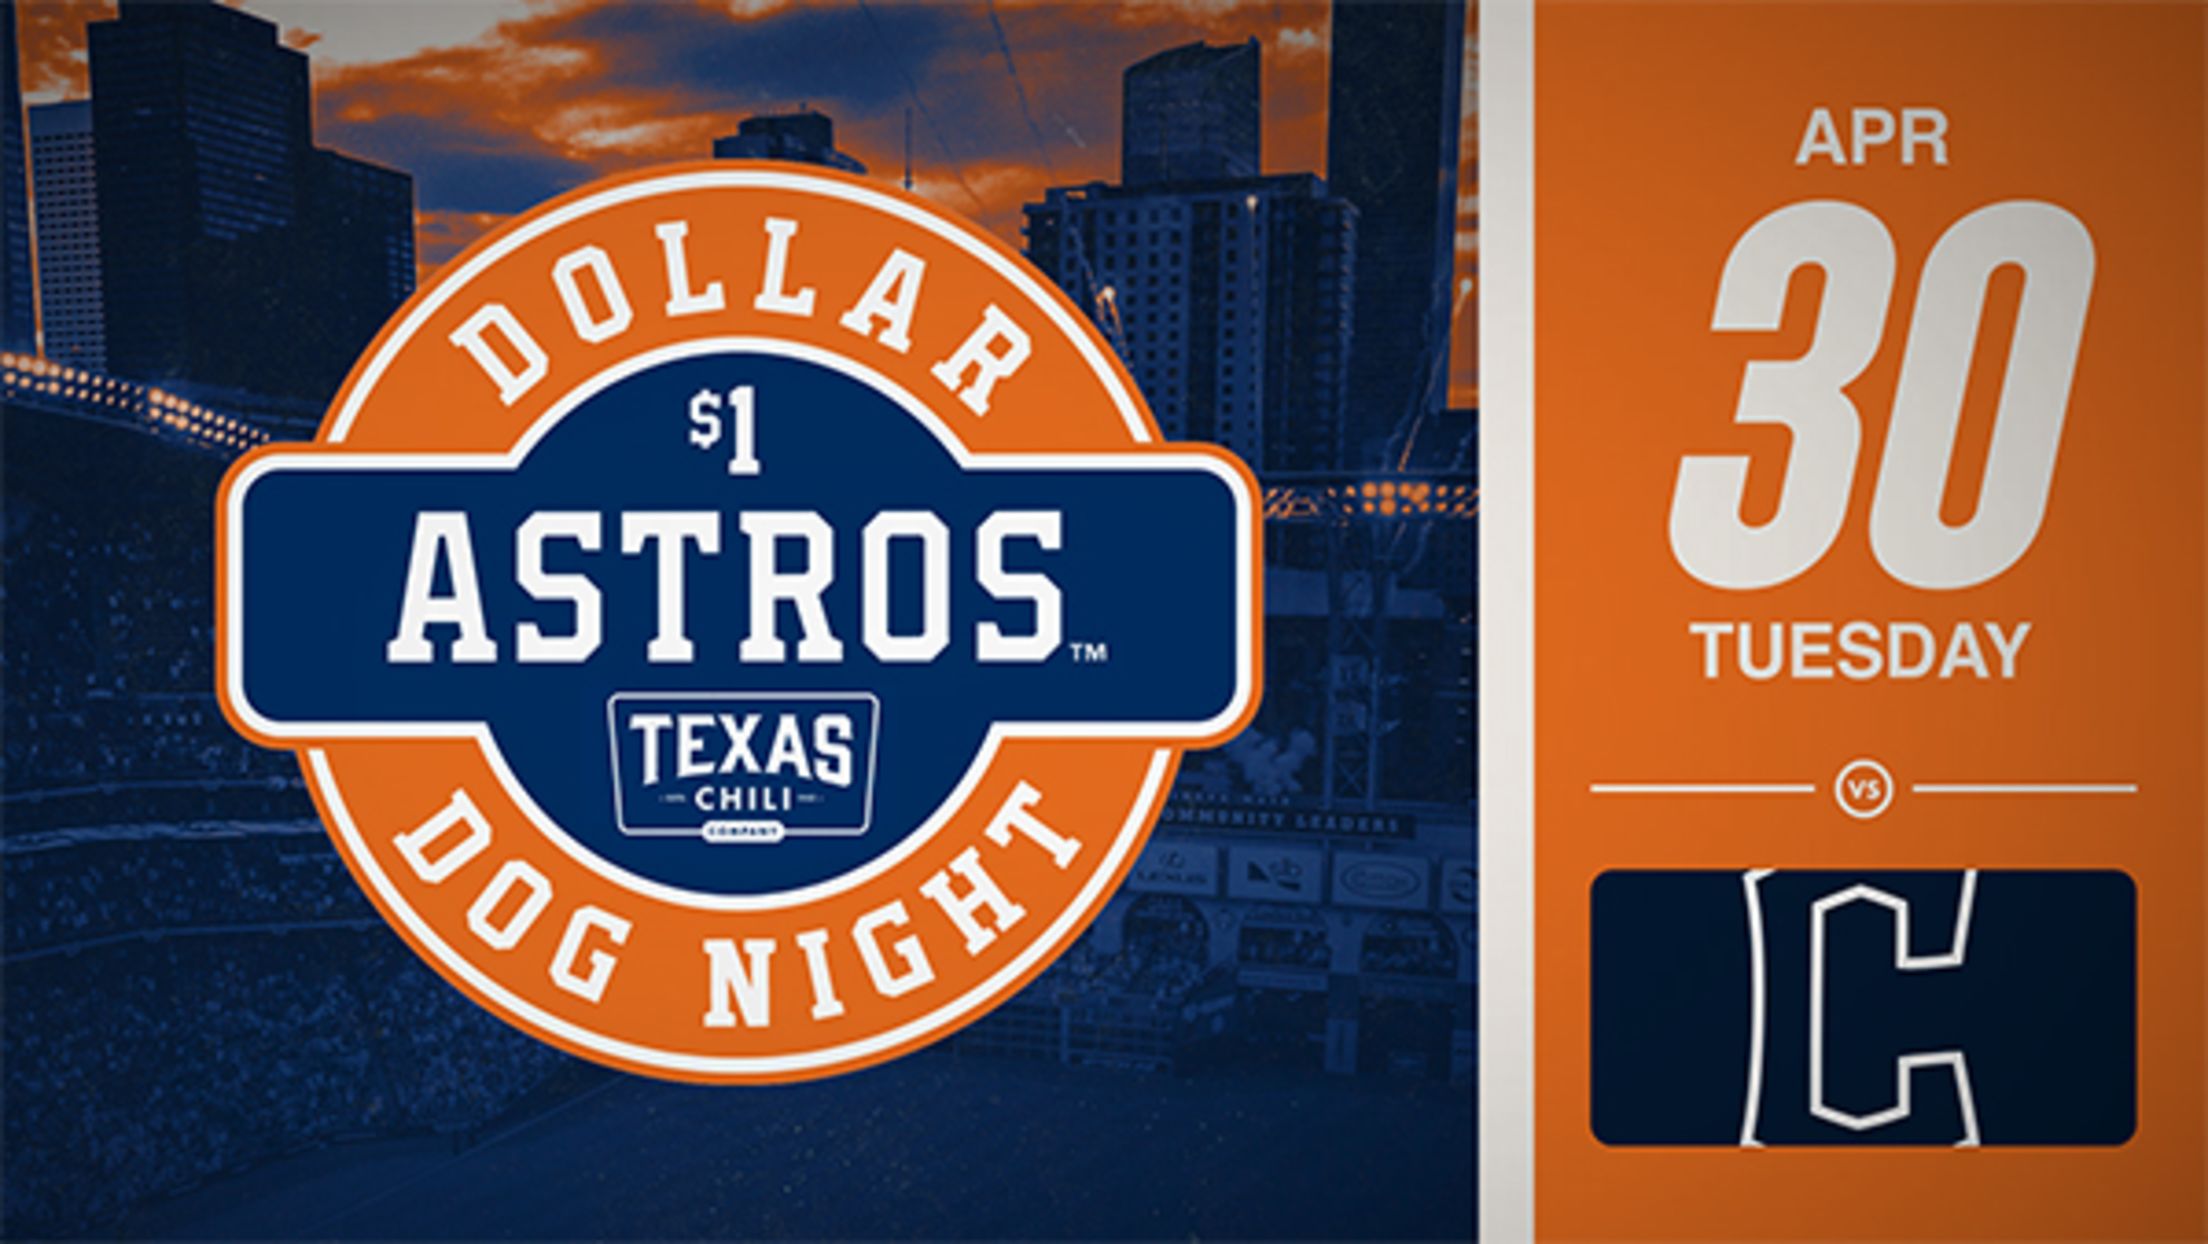 Astros jersey giveaway